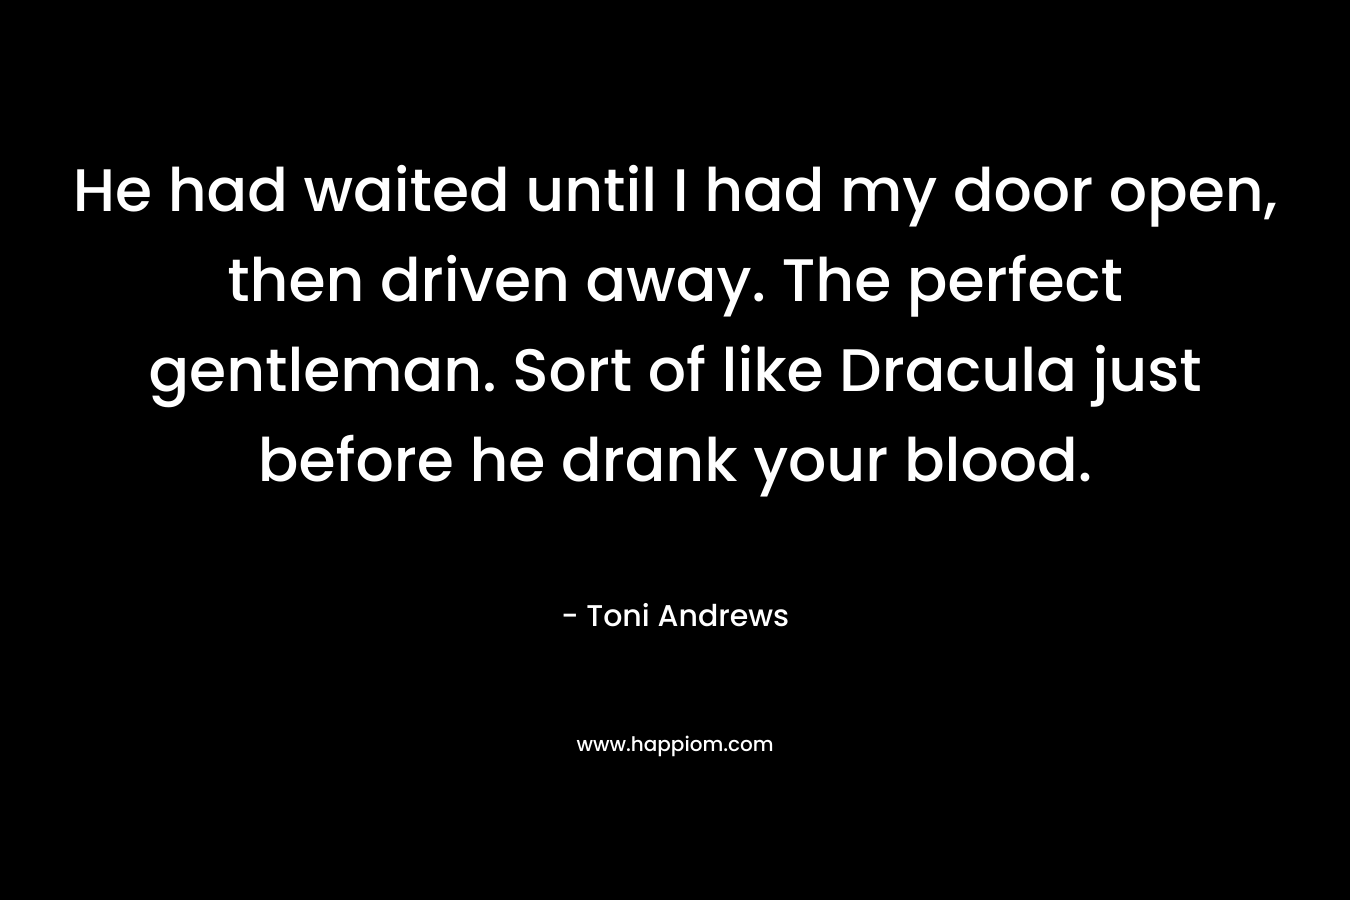 He had waited until I had my door open, then driven away. The perfect gentleman. Sort of like Dracula just before he drank your blood.